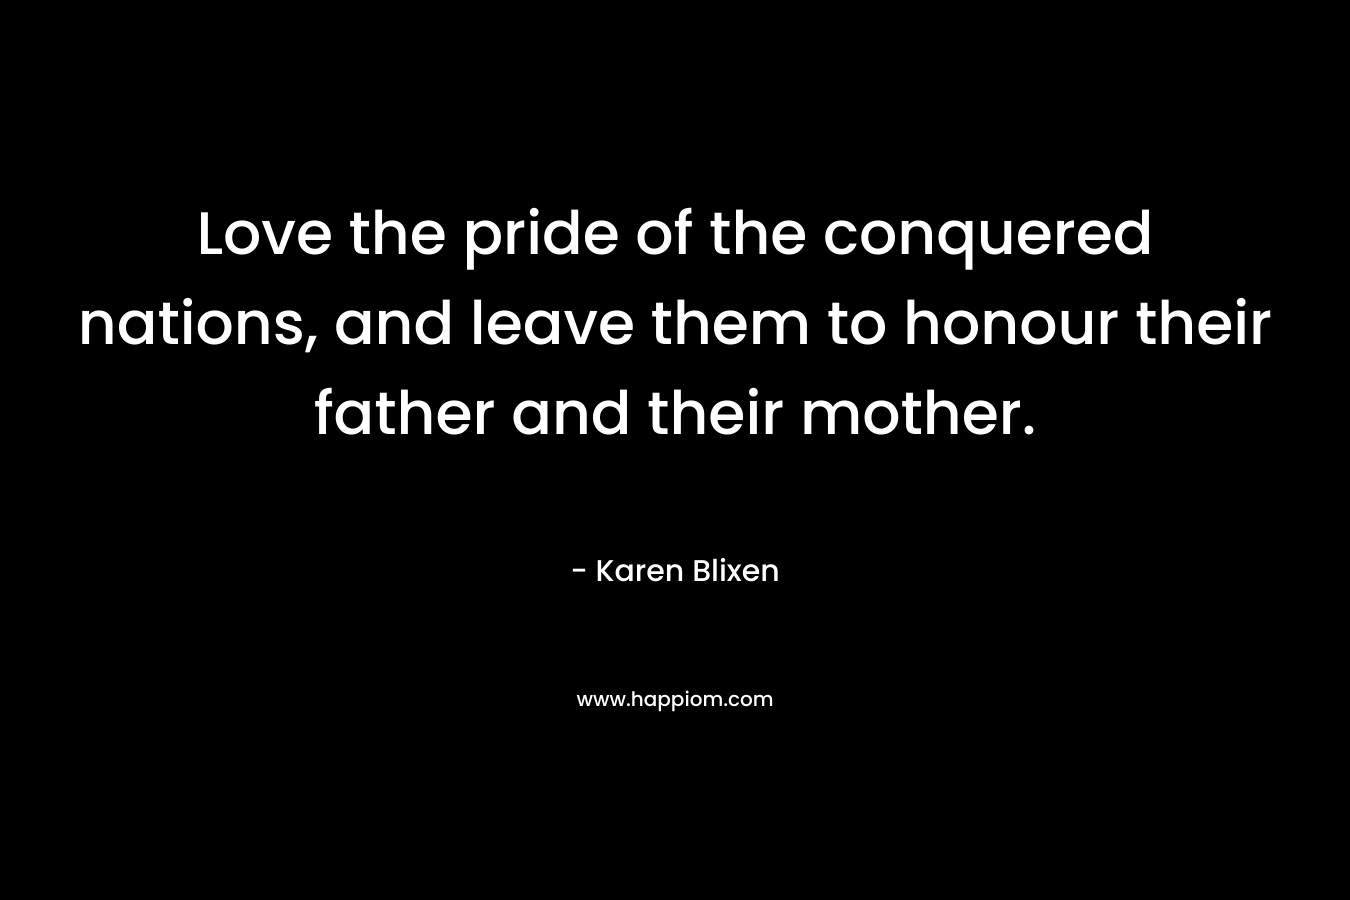 Love the pride of the conquered nations, and leave them to honour their father and their mother. – Karen Blixen